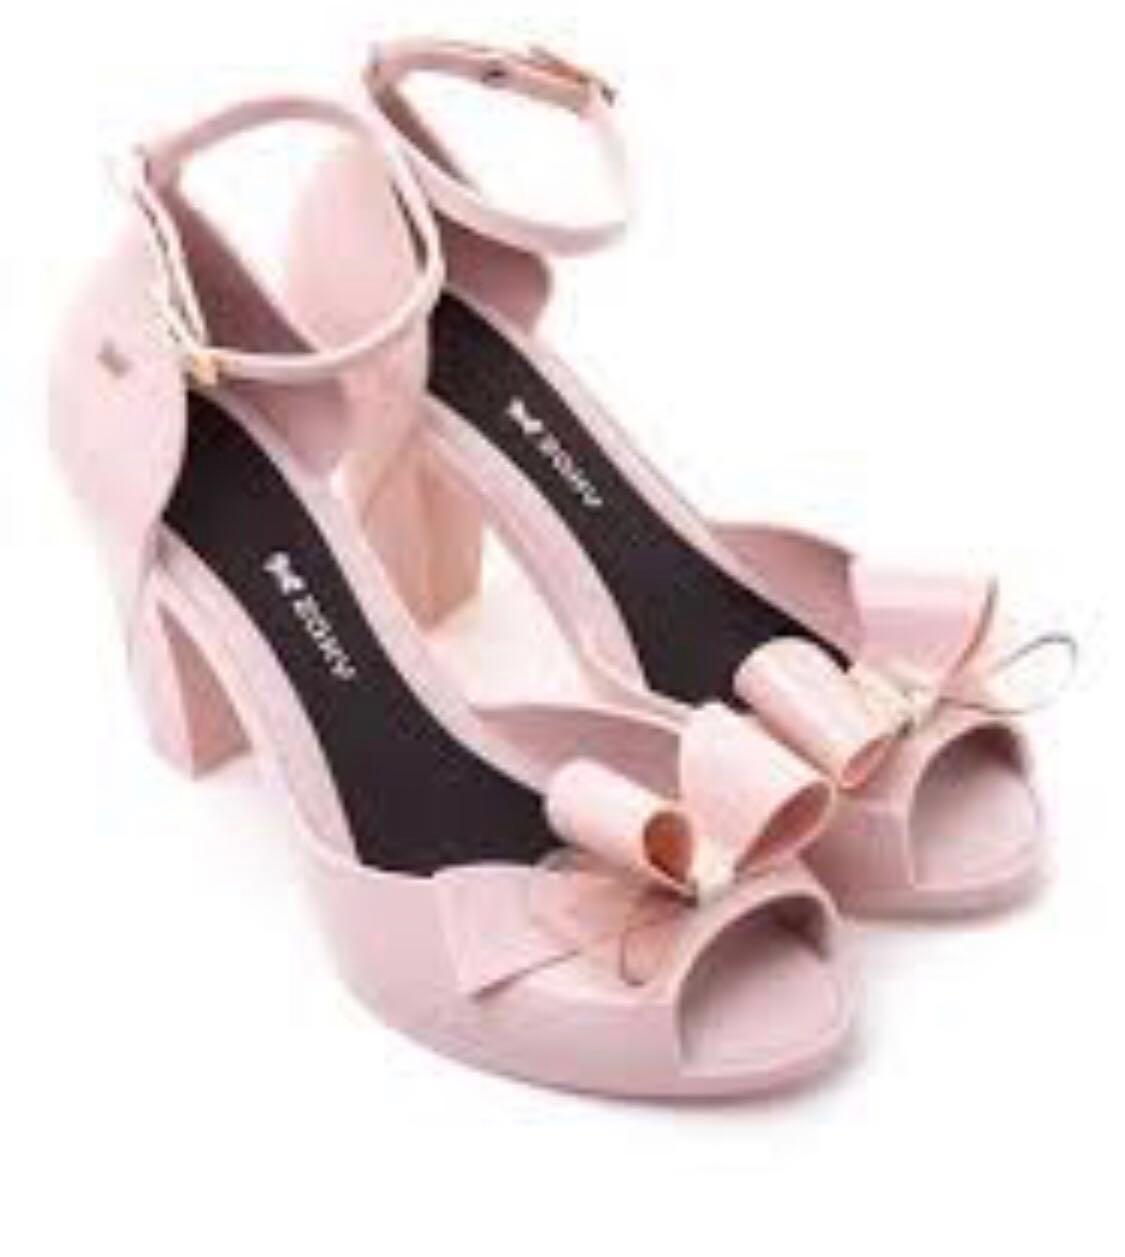 nude jelly shoes